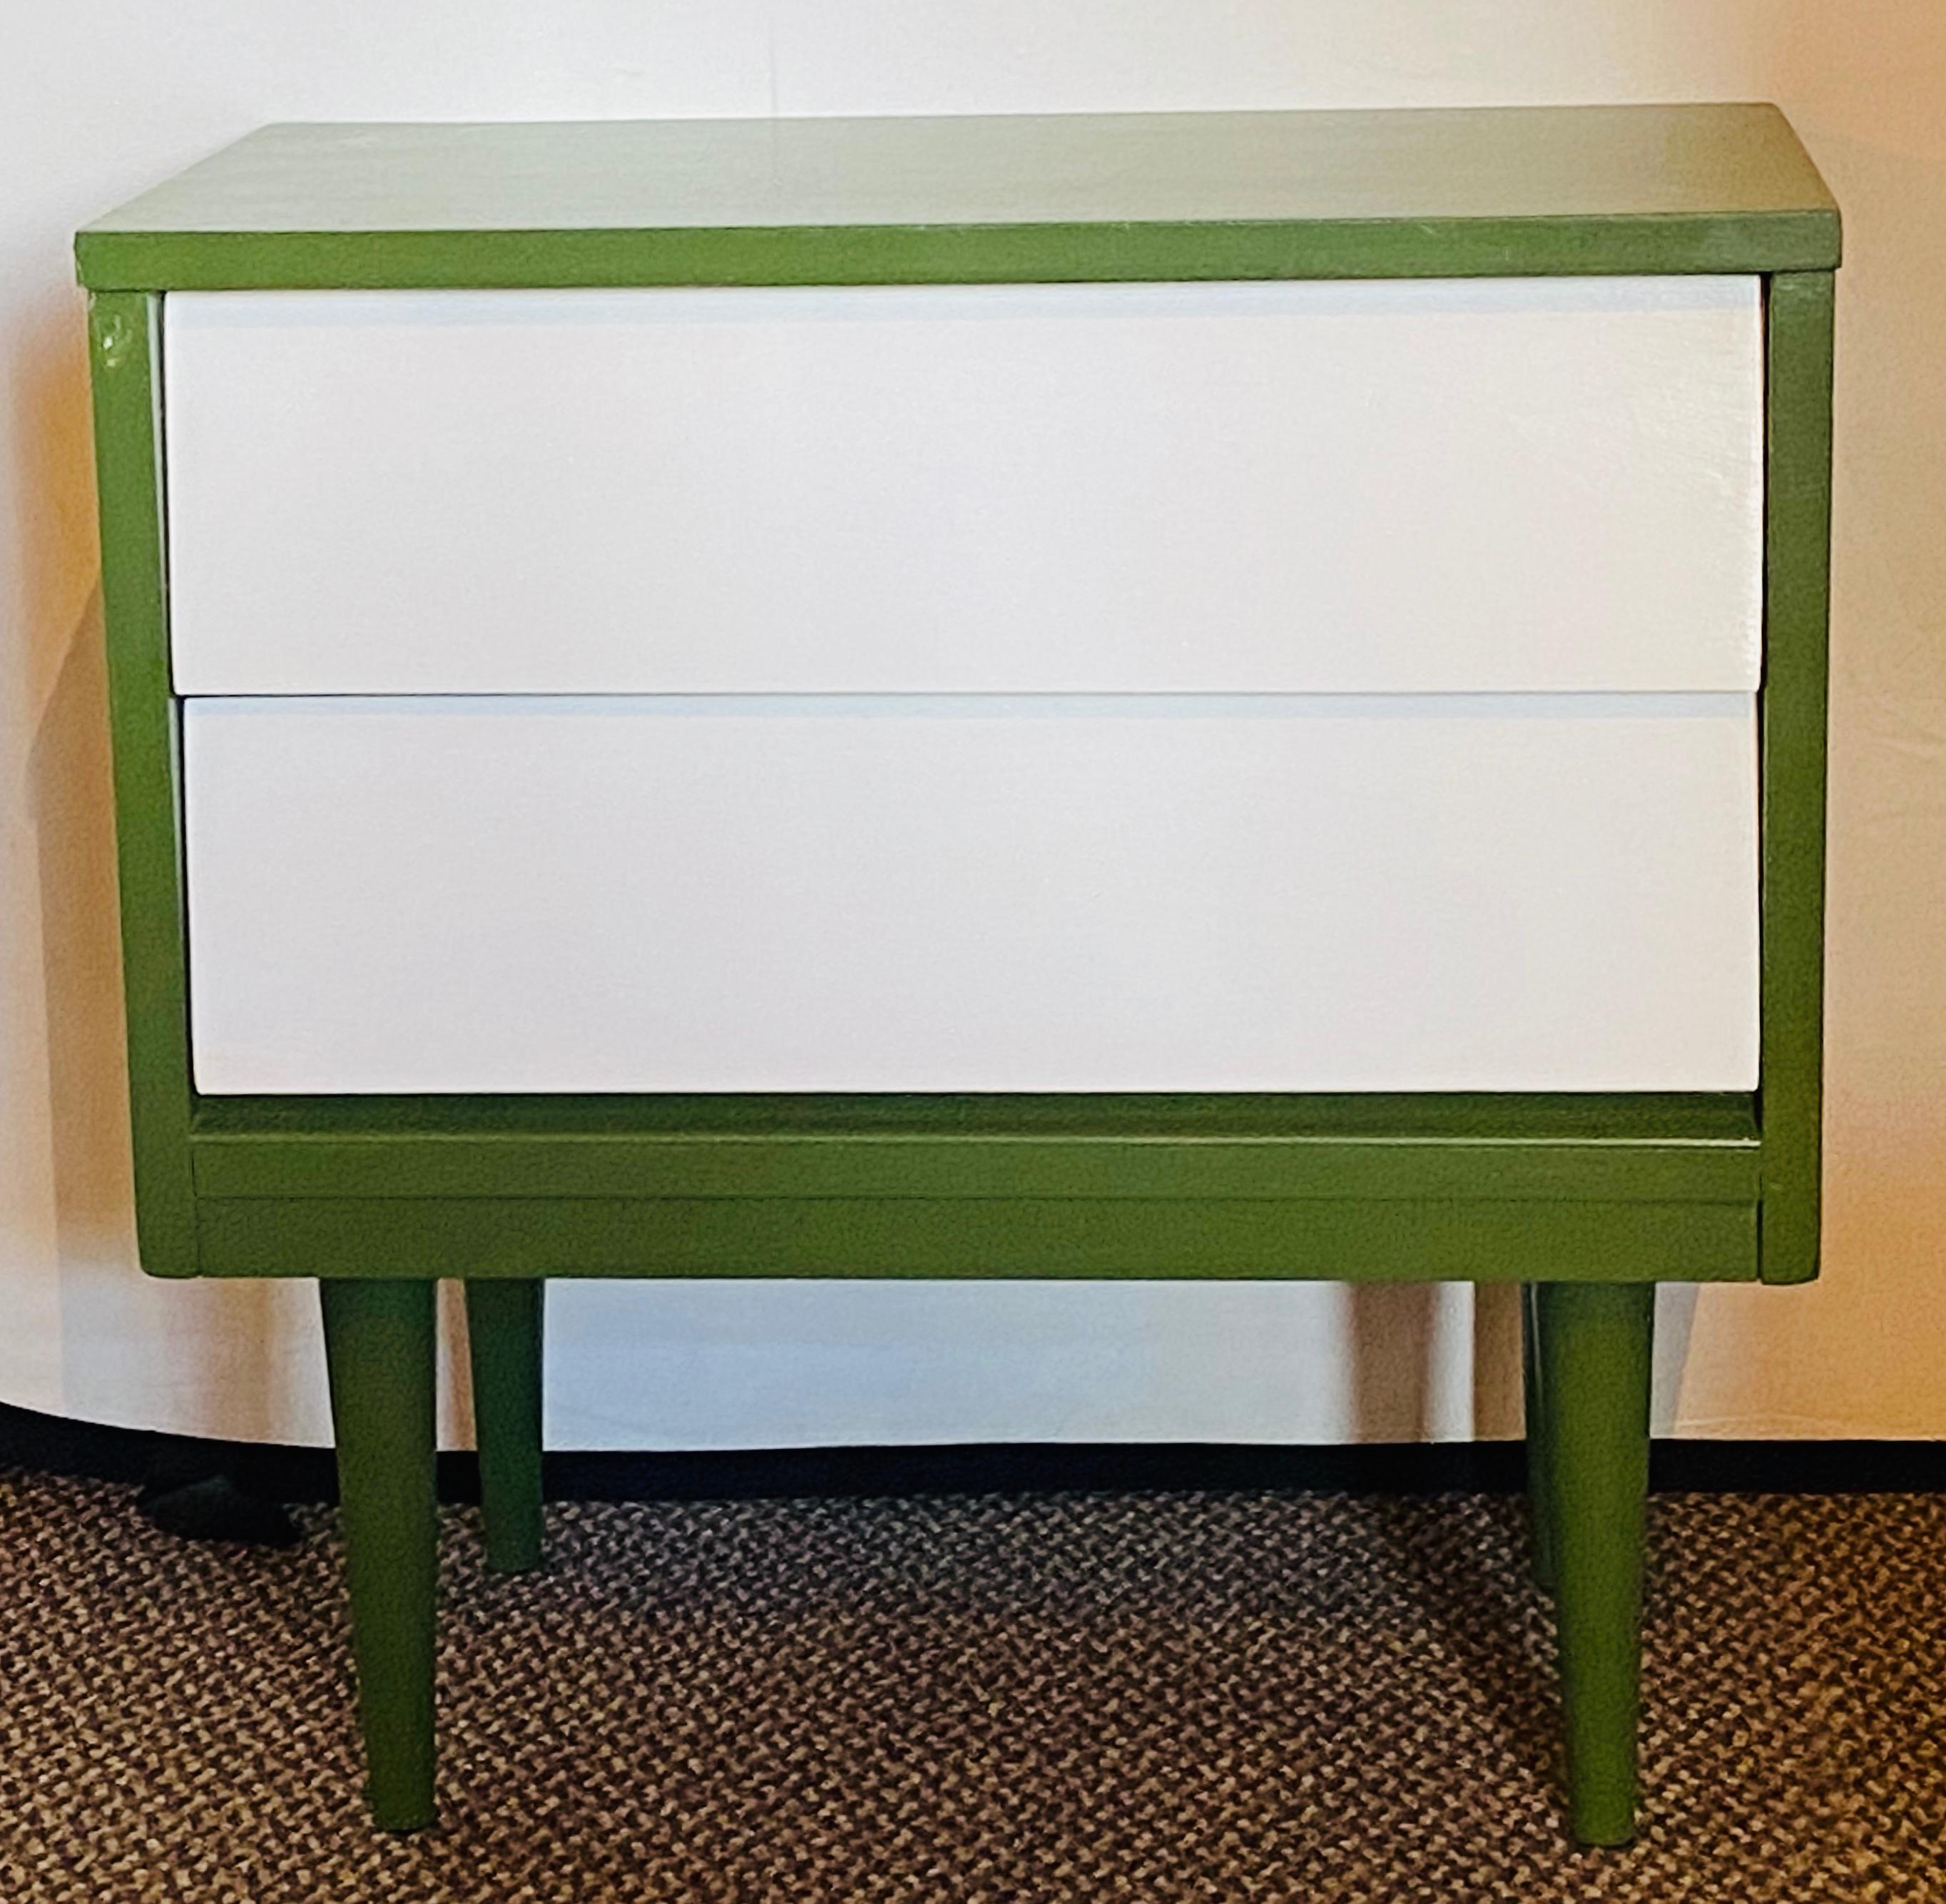 Pair of Mid-Century Modern nightstands or lamp tables. Two-tone paint decorated having a pair of white slanted drawers with hidden pulls on an olive green case. The whole supported by tapering legs. Perfect for multiple use such as side tables, lamp